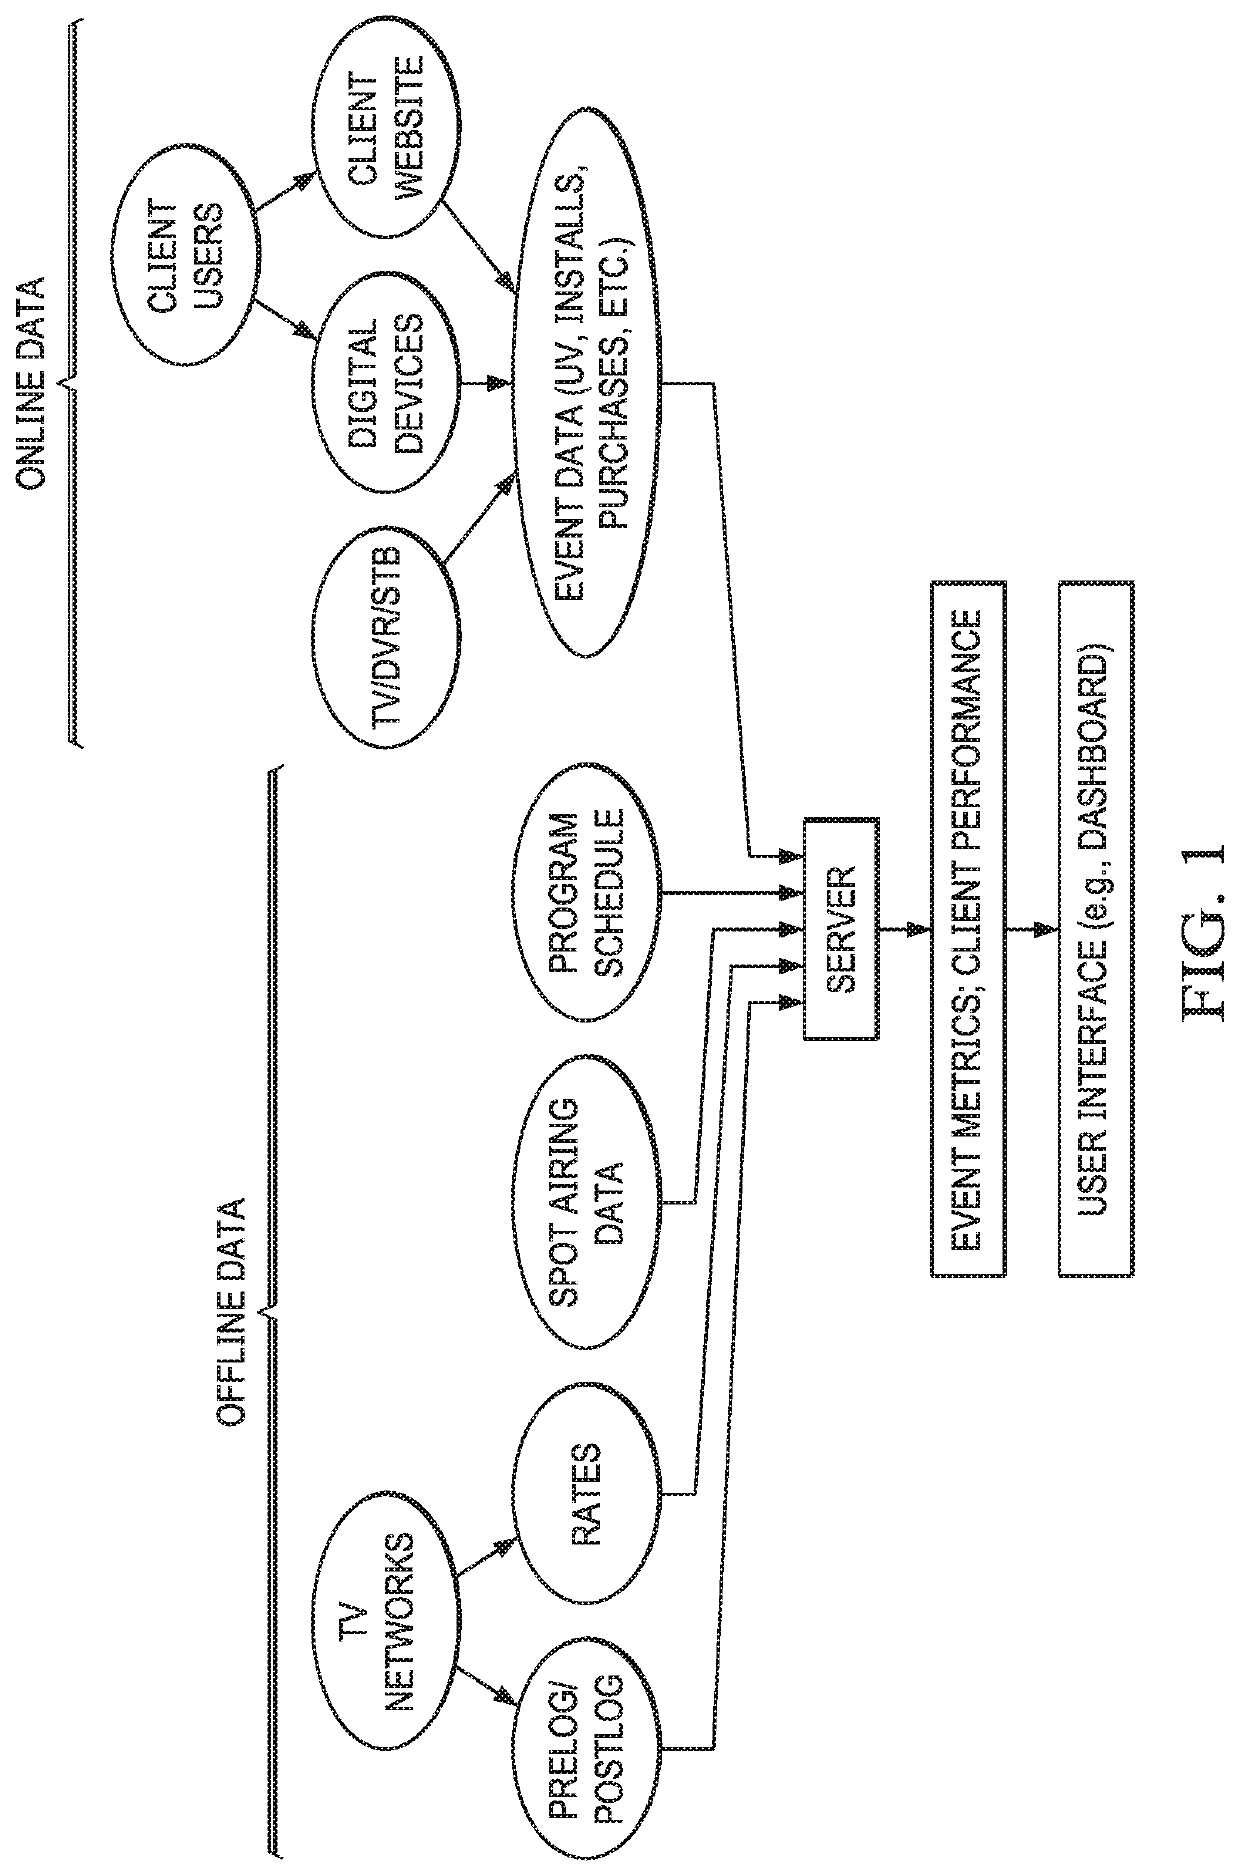 Systems and methods for determining media creative attribution to website traffic